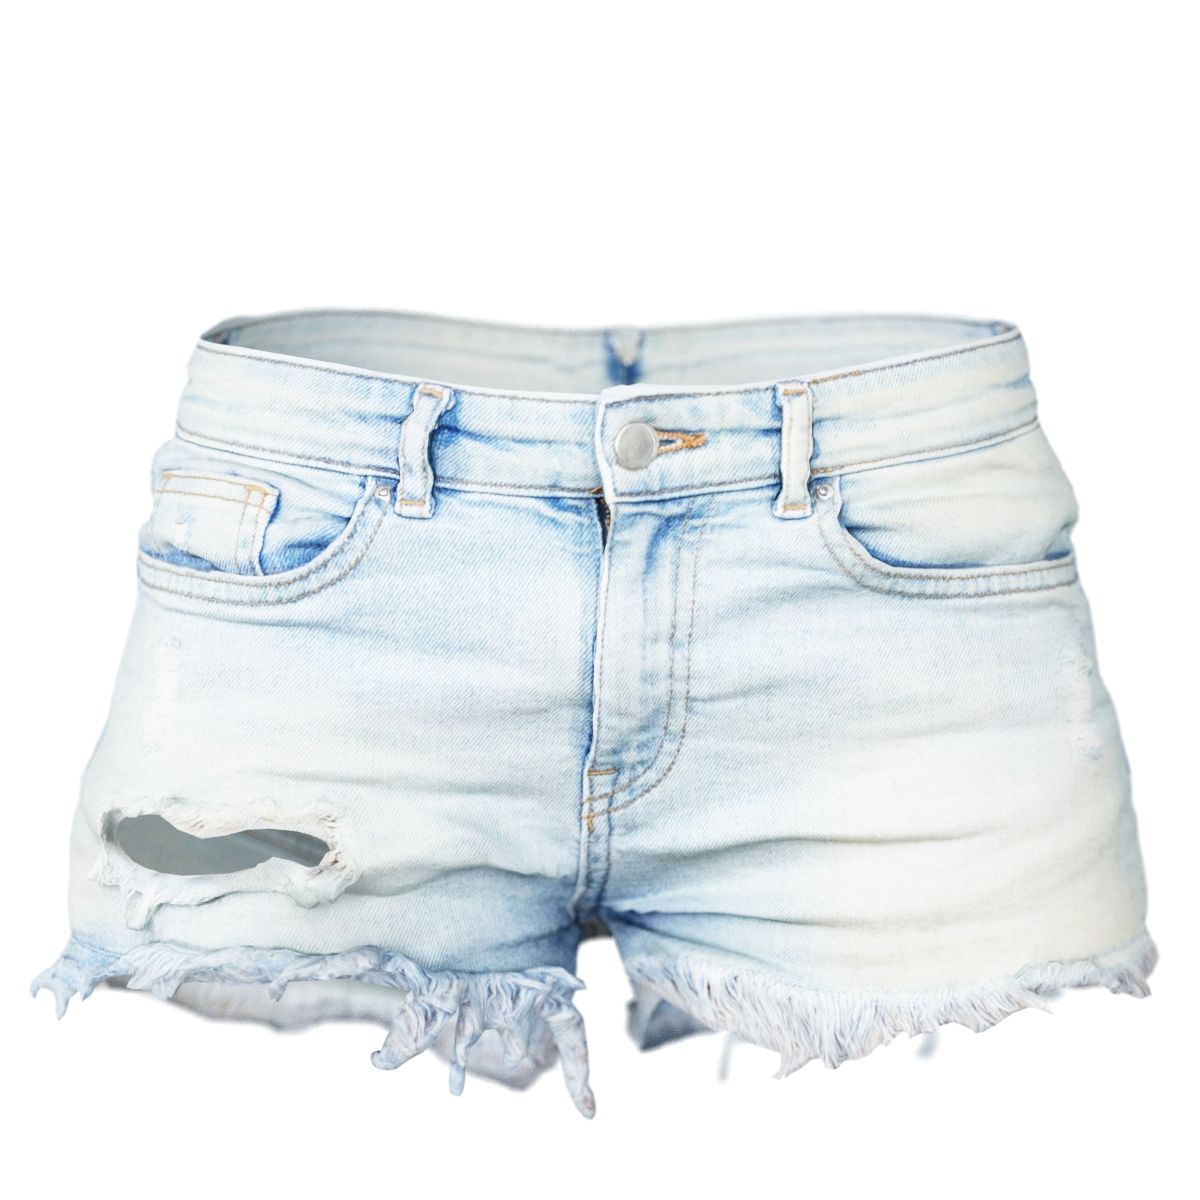 Vintage Shorts Jeans Light Ripped